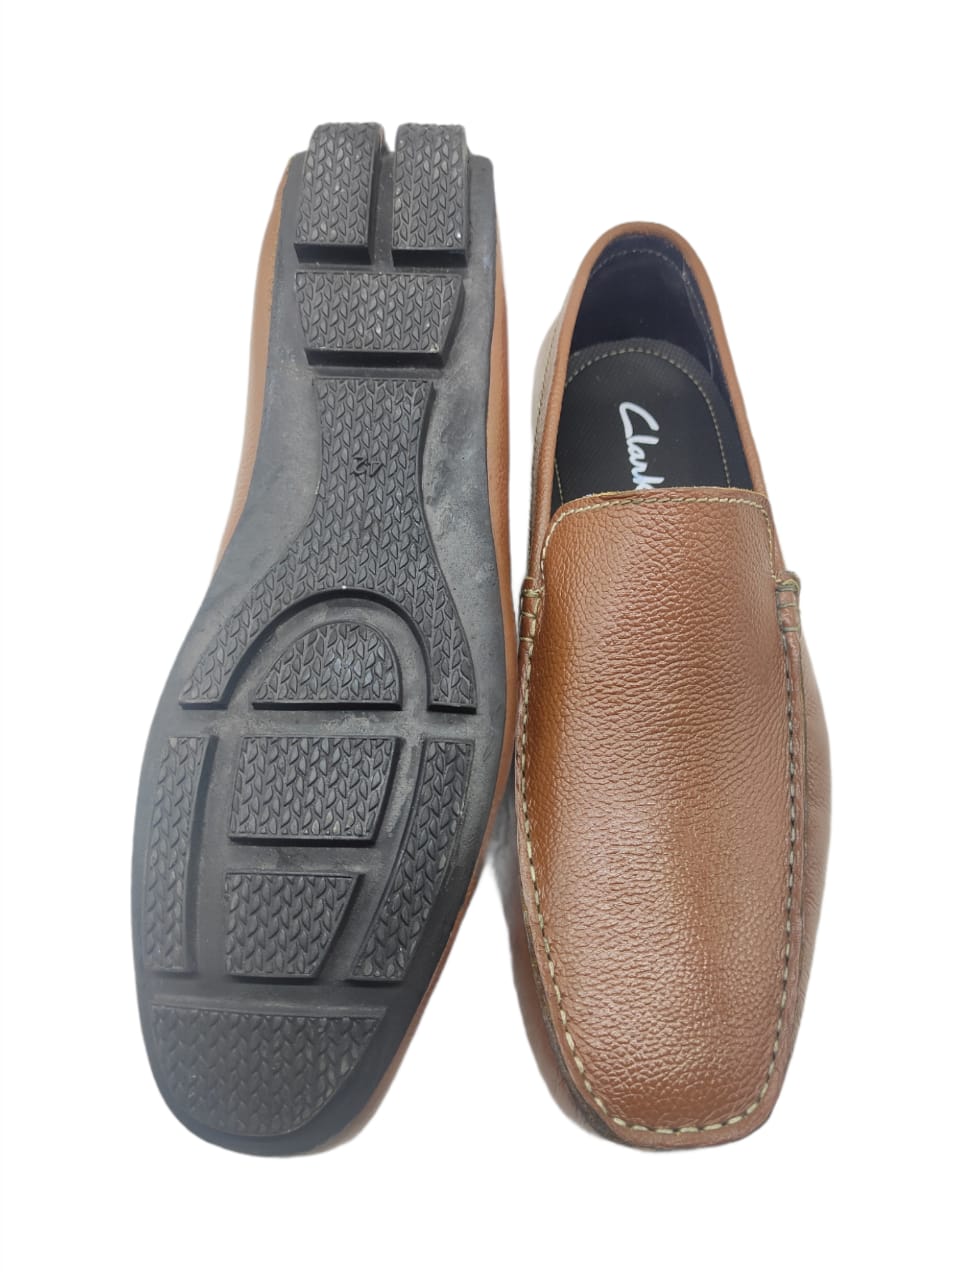 Genuine Leather Black With White Thread LOAFERS – Driving Shoes For Men -  Ambur Online Leathers